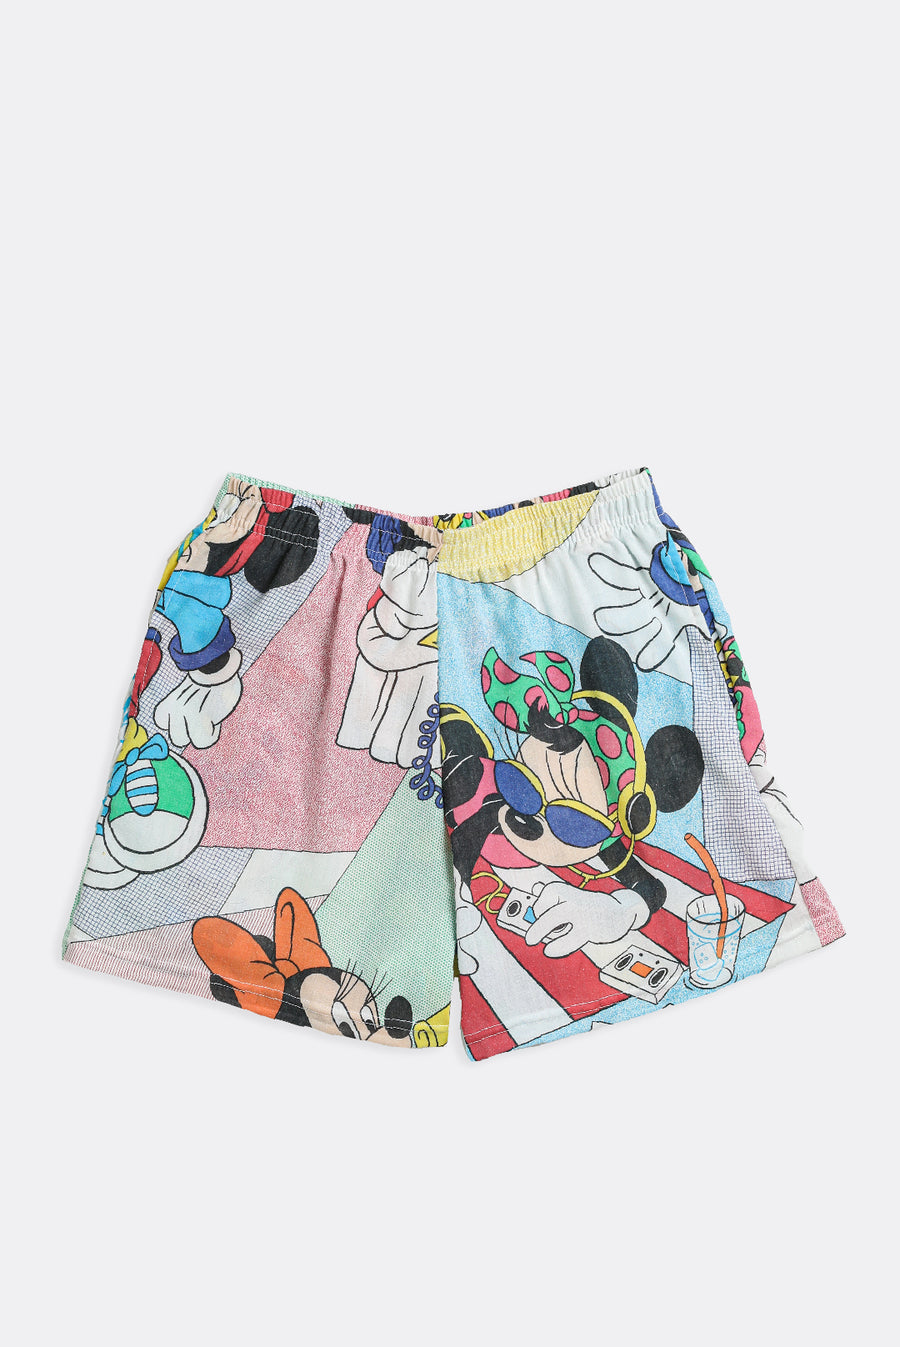 Unisex Rework Mickey and Minnie Mouse and Friends Boxer Shorts - S